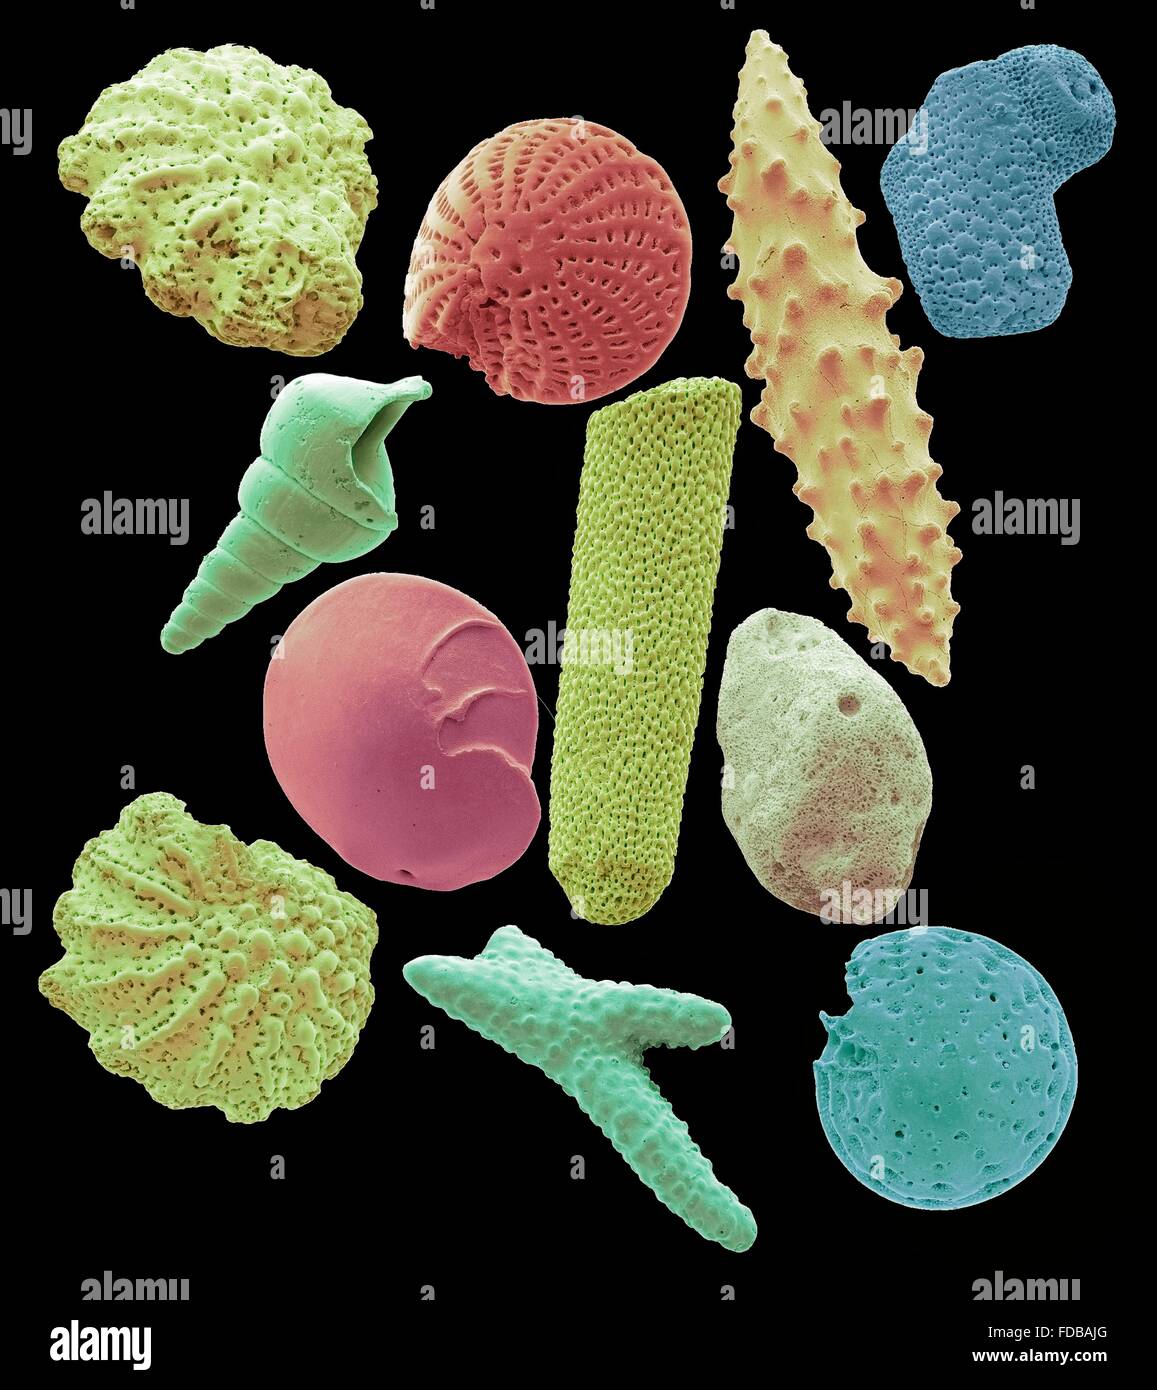 Sand microfossils. Coloured scanning electron micrograph (SEM) of microfossils from maldives beach sand. Microfossils are roughly 0.05 to 2mm in size. These are the remains of complete organisms, the common ones are foraminifera, ostracods and sponge spicules. Magnification: x 40 when printed at 10 centimetres wide. Stock Photo